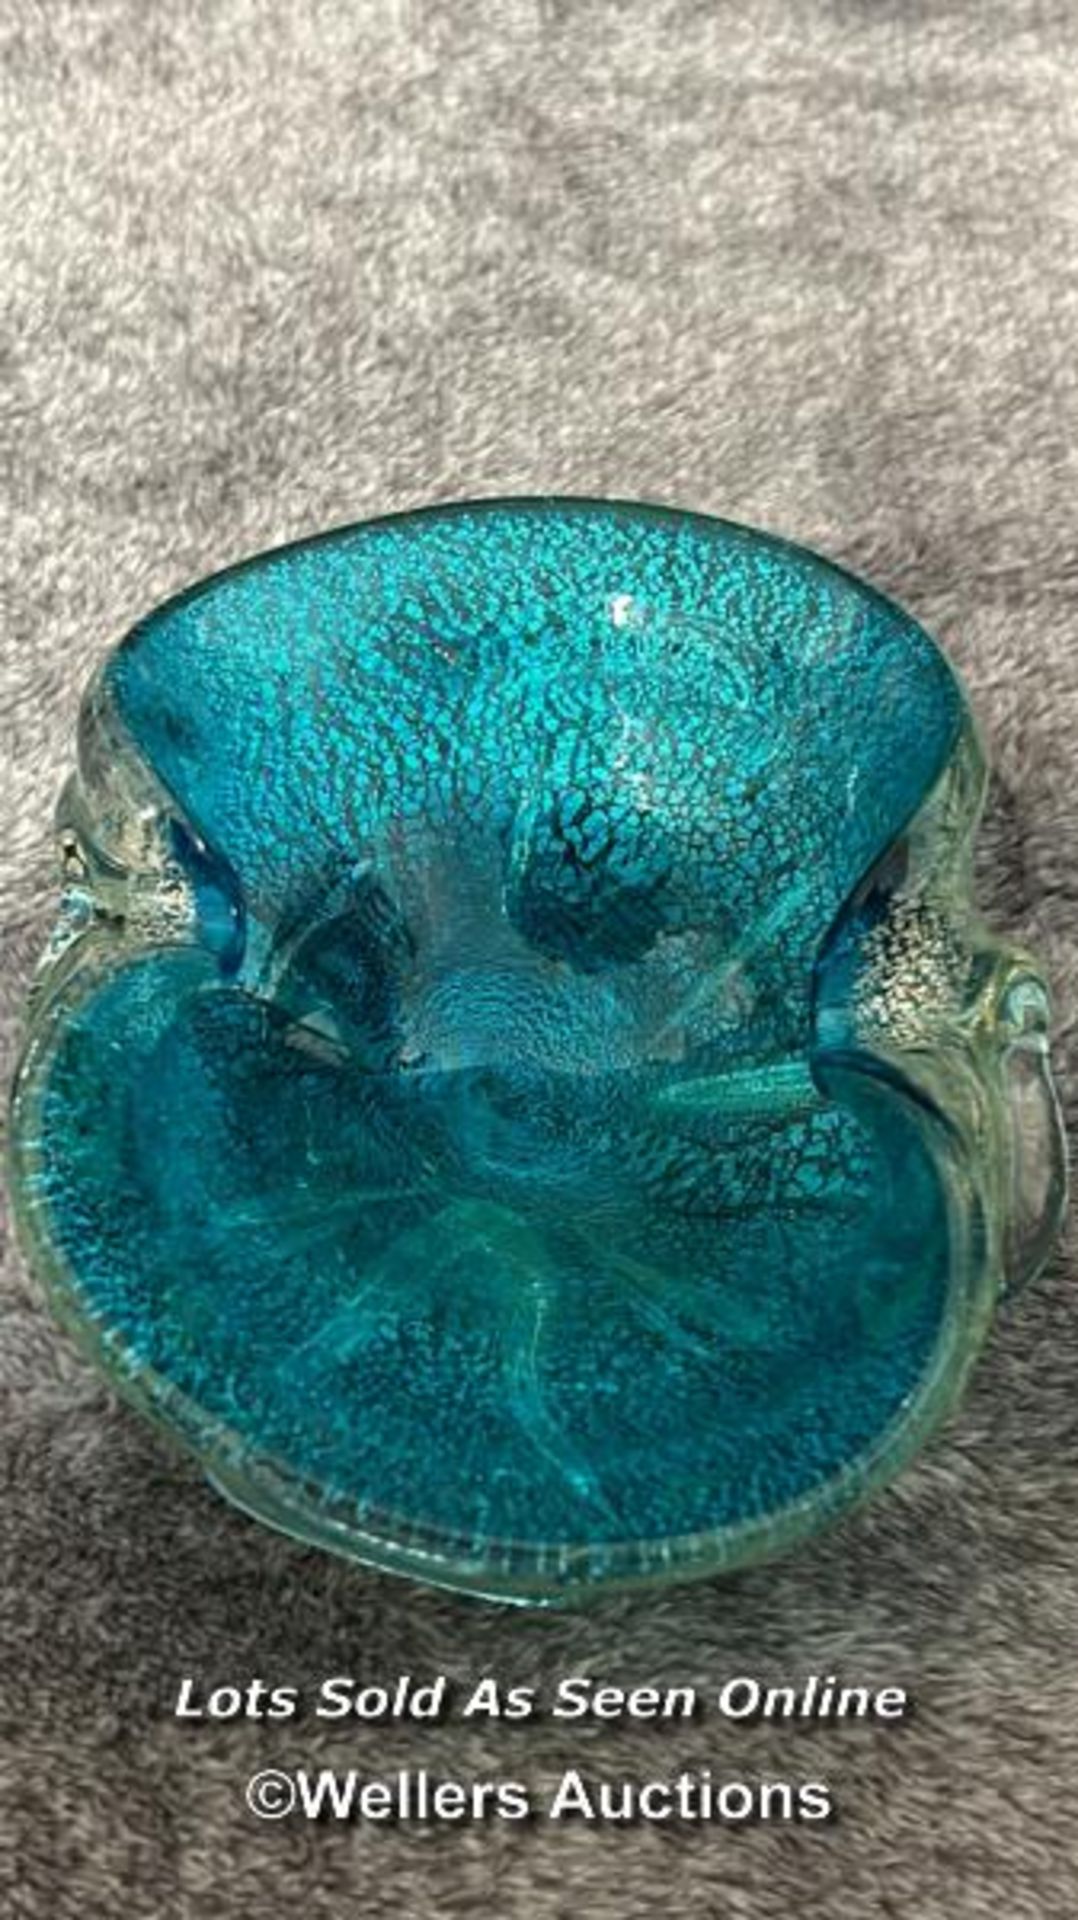 Mdina 'pulled ear' glass vase, 13cm high and Murano style glass dish / AN2 - Image 6 of 7